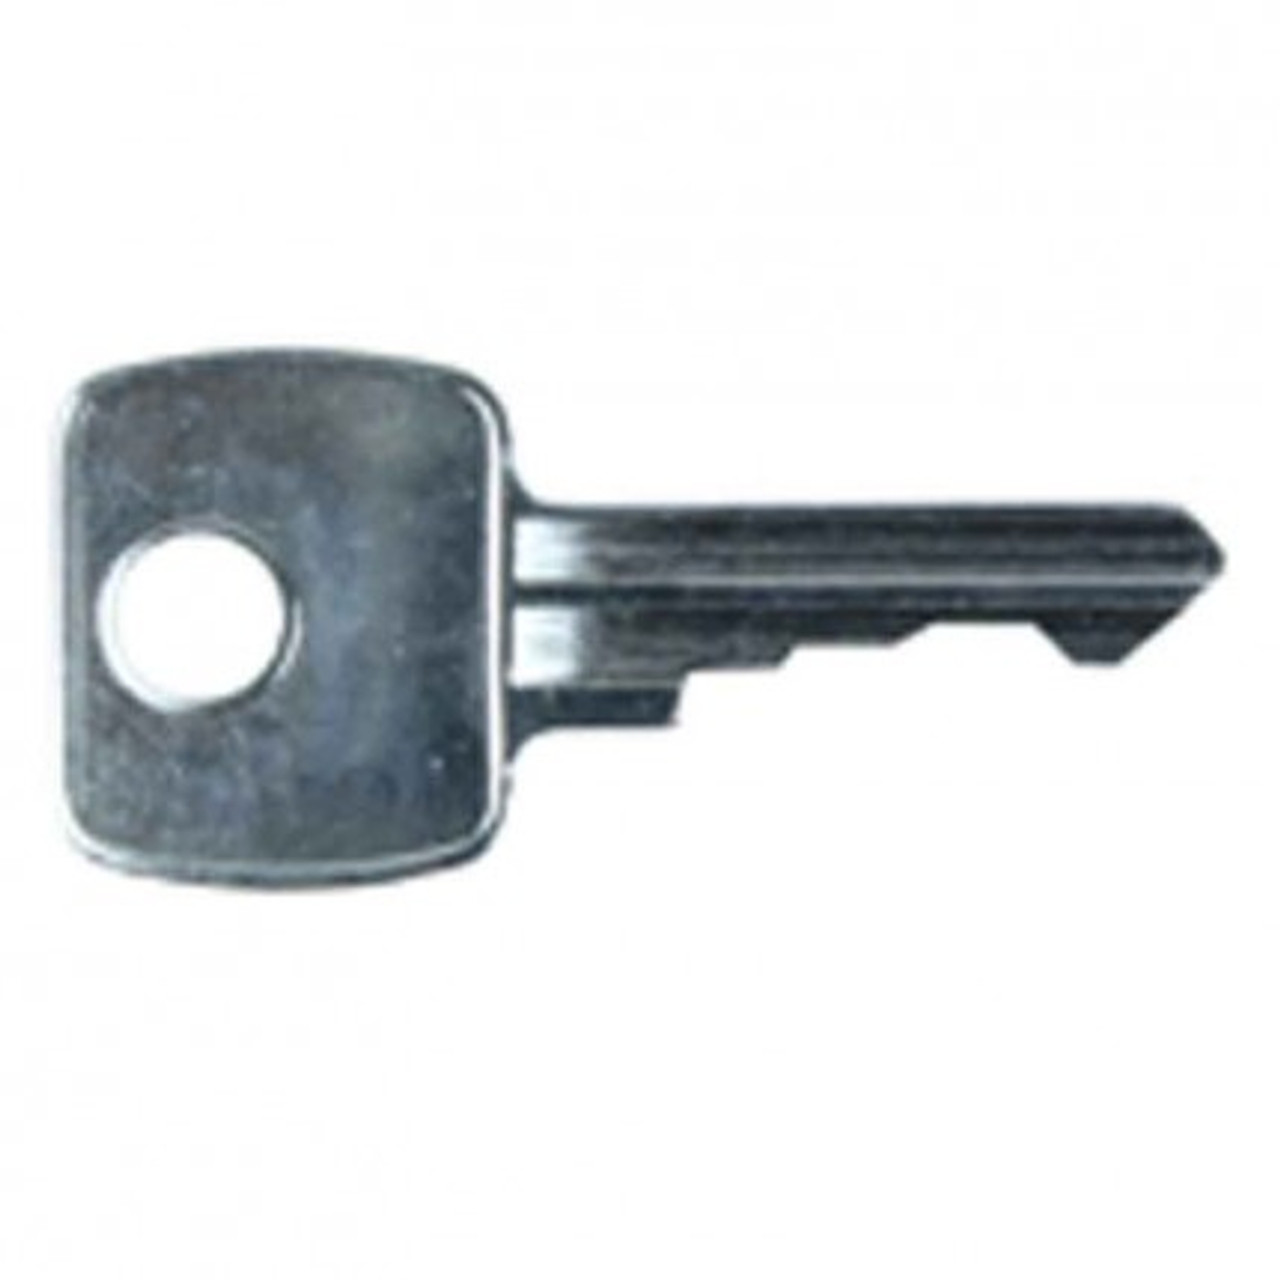 Replacement Keys For File Cabinets Simple Order Form Office